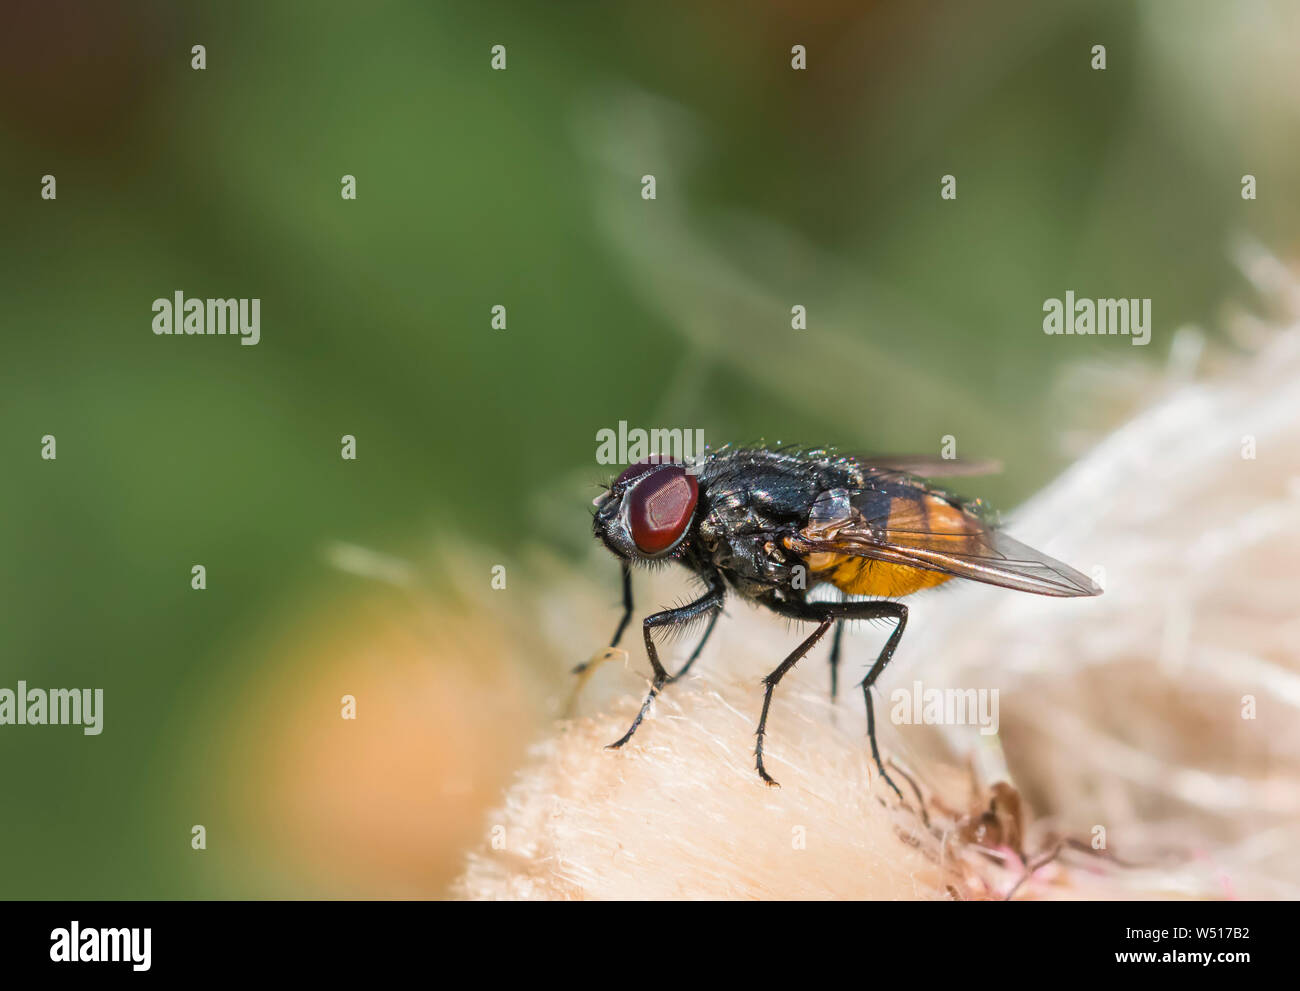 Male Musca autumnalis (Face fly, Autumn fly, Autumn housefly, Autumn house fly) near cattle in Summer in West Sussex, England, UK. Stock Photo